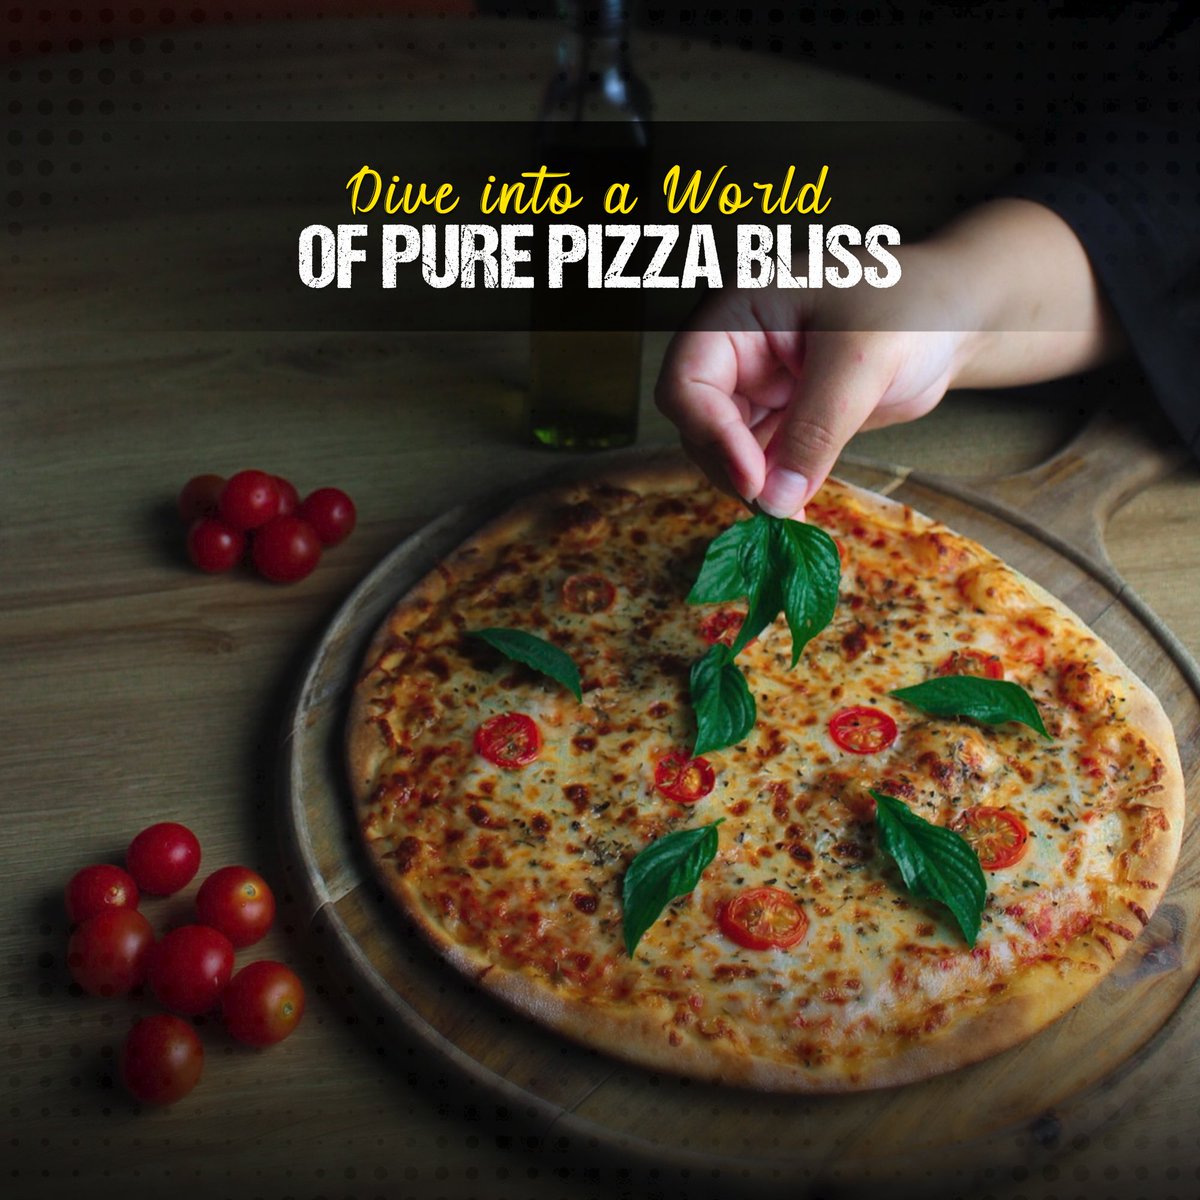 Taste perfection at our pizza paradise, where every slice is a culinary delight.

For reservations :
Email Us At: h9507@accor.com
Call Us At +966 12 2337911

#IbisJeddahCityCenterDining #dining #ibis #ibisjeddahcitycenter #hotels #visiksa #ksatourism #tourism #newplaces #opennow